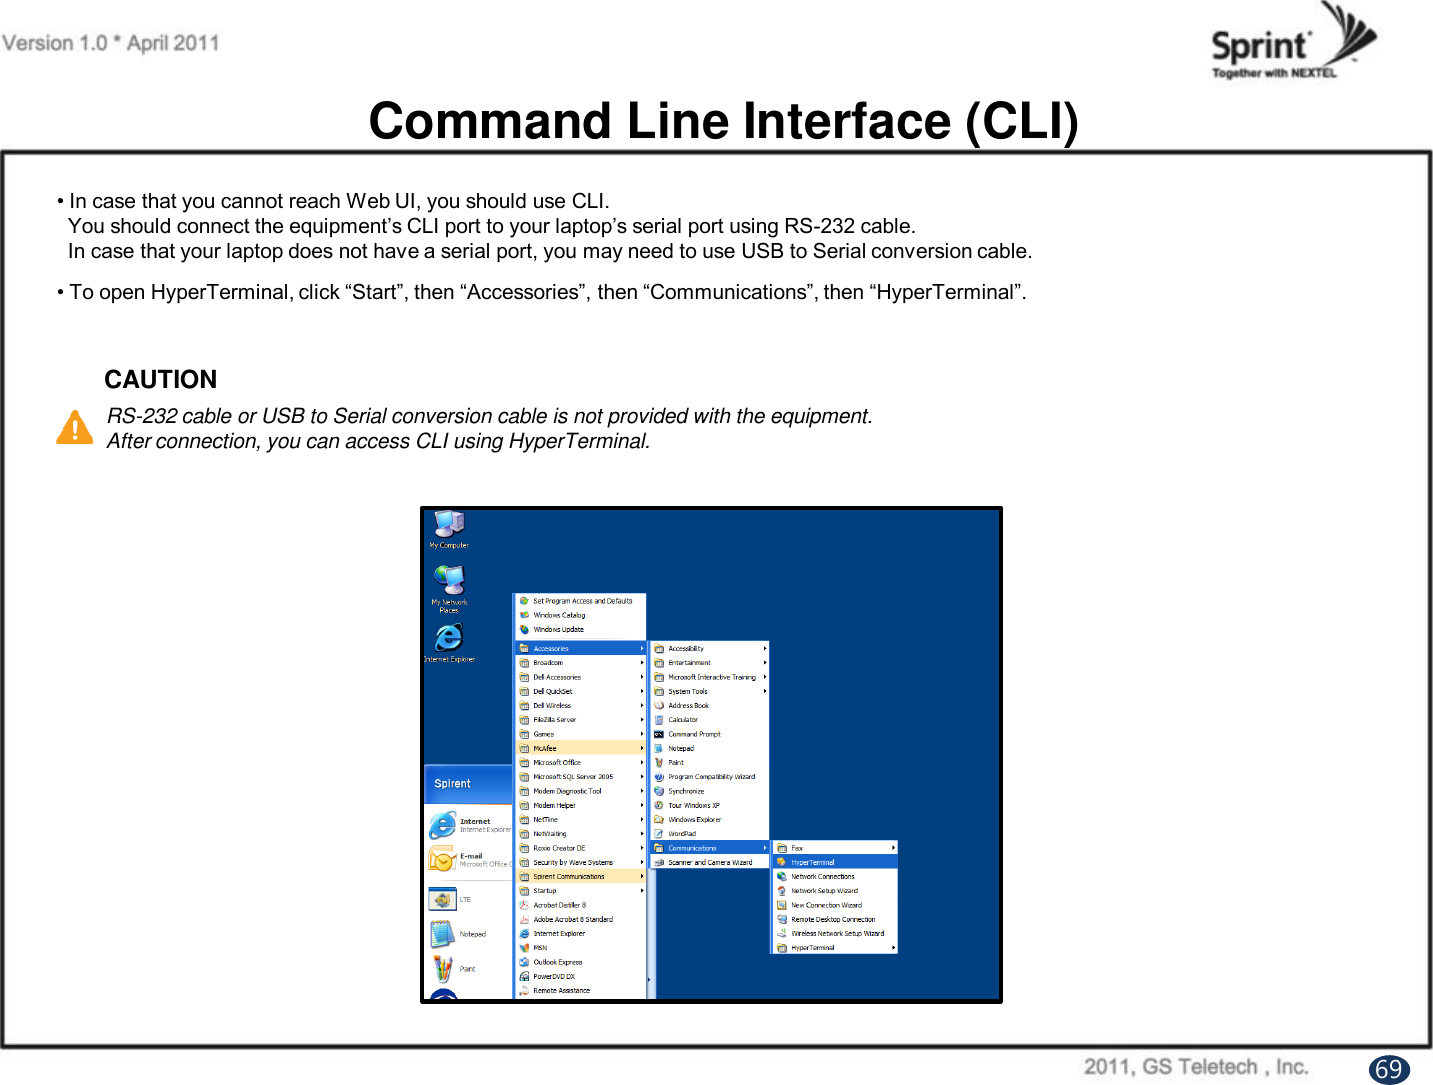 Command Line Interface (CLI)CAUTIONRS-232 cable or USB to Serial conversion cable is not provided with the equipment.After connection, you can access CLI using HyperTerminal.• In case that you cannot reach Web UI, you should use CLI.You should connect the equipment‟s CLI port to your laptop‟s serial port using RS-232 cable.In case that your laptop does not have a serial port, you may need to use USB to Serial conversion cable.• To open HyperTerminal, click “Start”, then “Accessories”, then “Communications”, then “HyperTerminal”.69